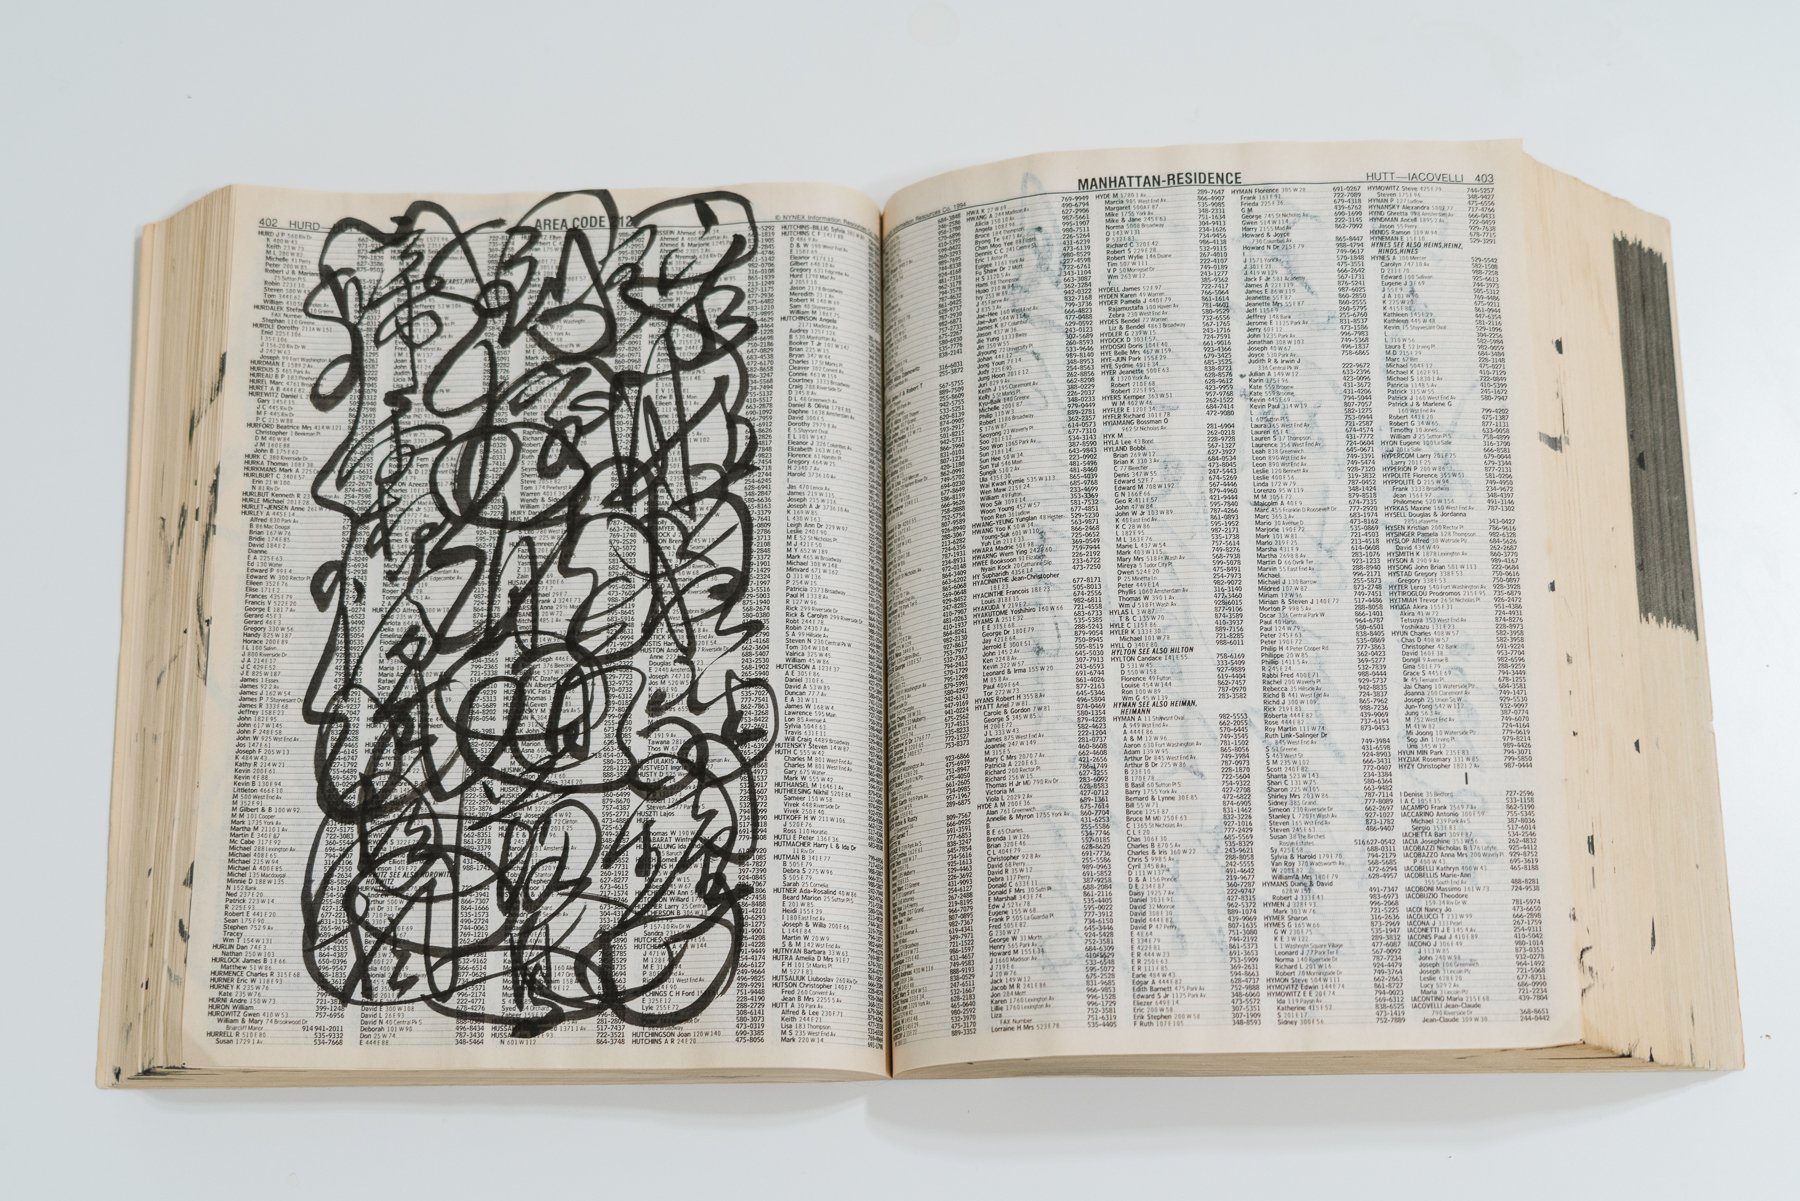  C. C. Wang, no title (Phonebook with Artist’s Calligraphy Practice), 1998. Ink on telephone book, 10 ¾ x 19 ½ x 2 inches (27.3 × 49.5 × 5.1 cm). Private Collection. Image copyright the Estate of C.C. Wang. Photo: Fu Qiumeng Fine Art. 